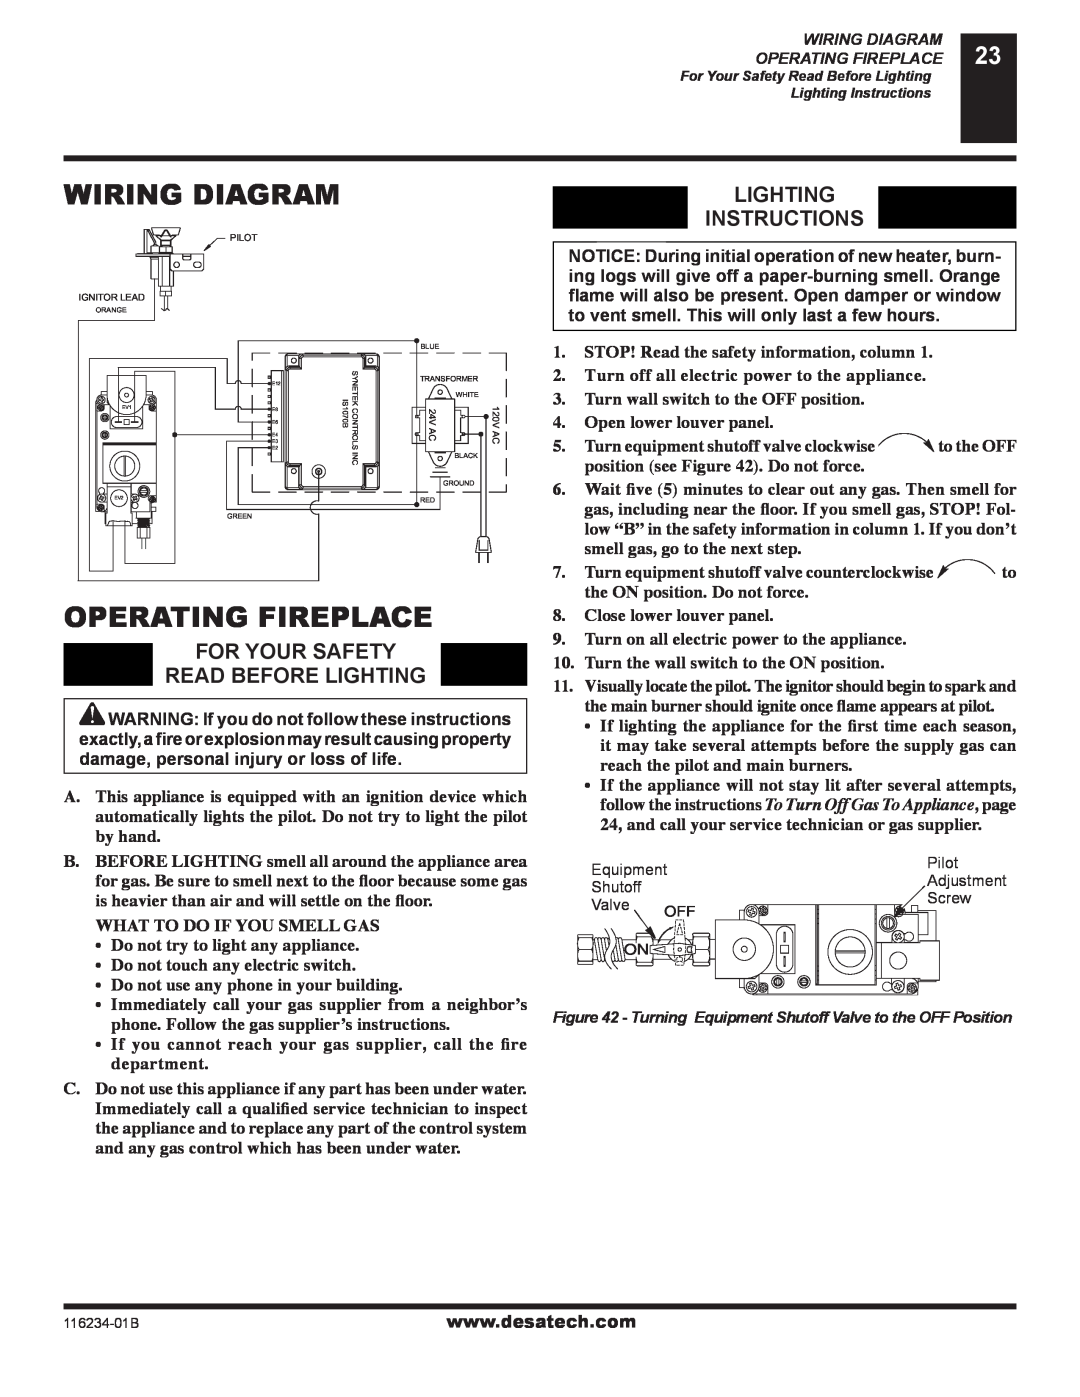 Desa (V)TC36NE Wiring Diagram, Operating Fireplace, Lighting Instructions, For Your Safety, Read Before Lighting 